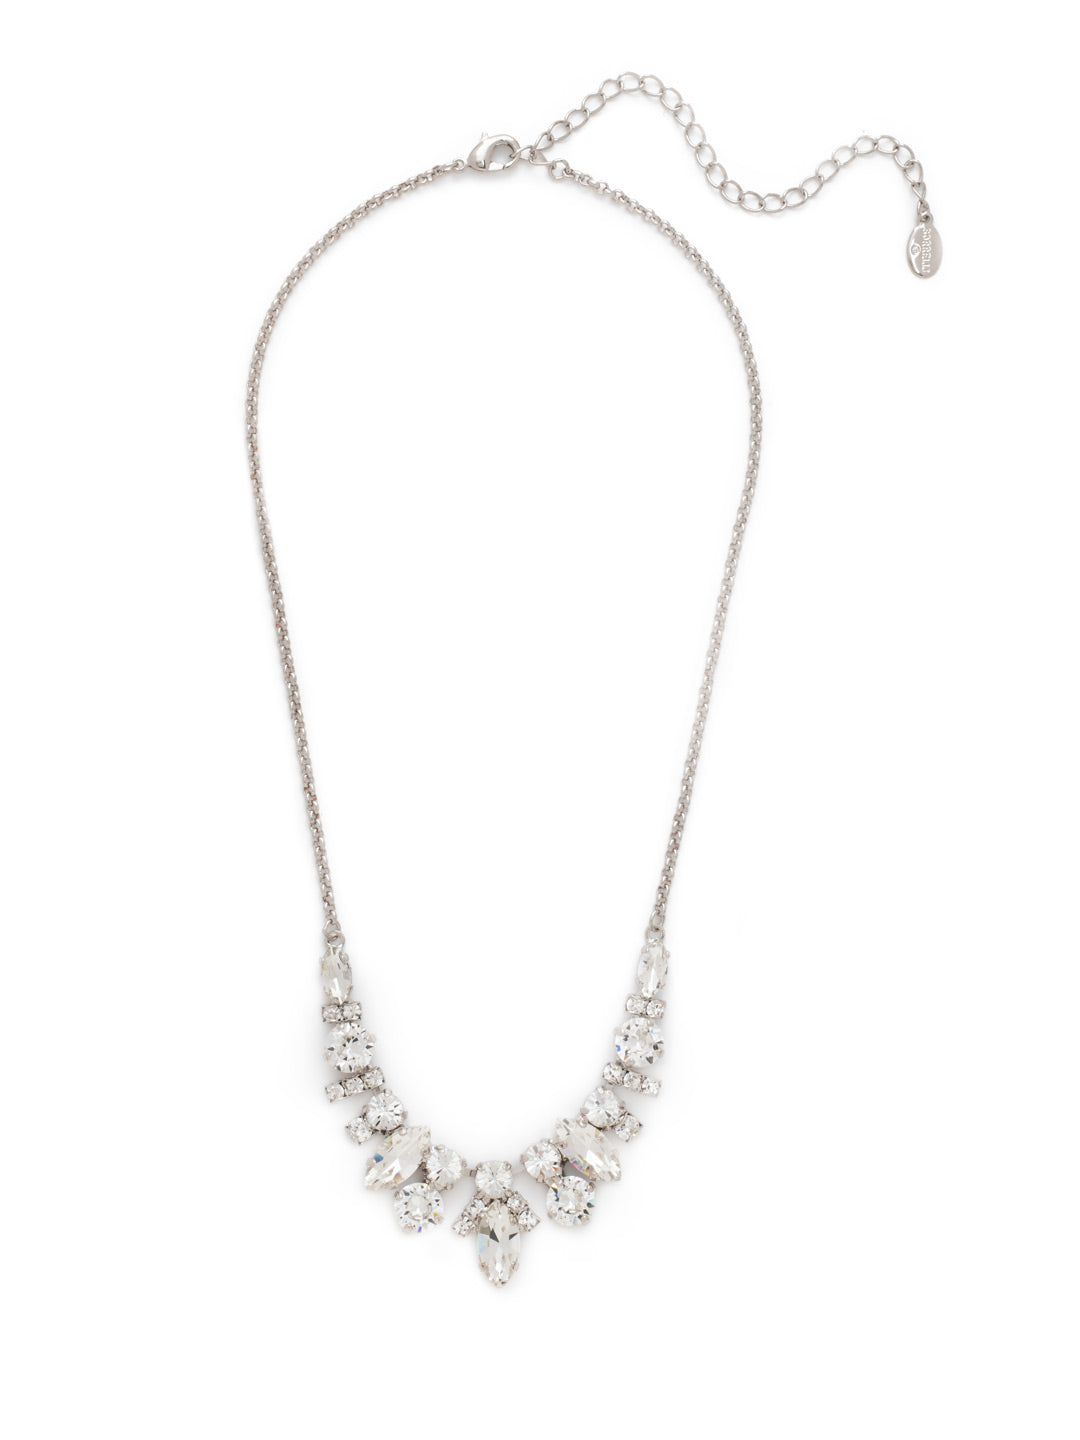 Noveau Navette Statement Necklace - NDG90RHCRY - <p>Three shimmering navettes are the focus of this modern, yet classic style. From Sorrelli's Crystal collection in our Palladium Silver-tone finish.</p>